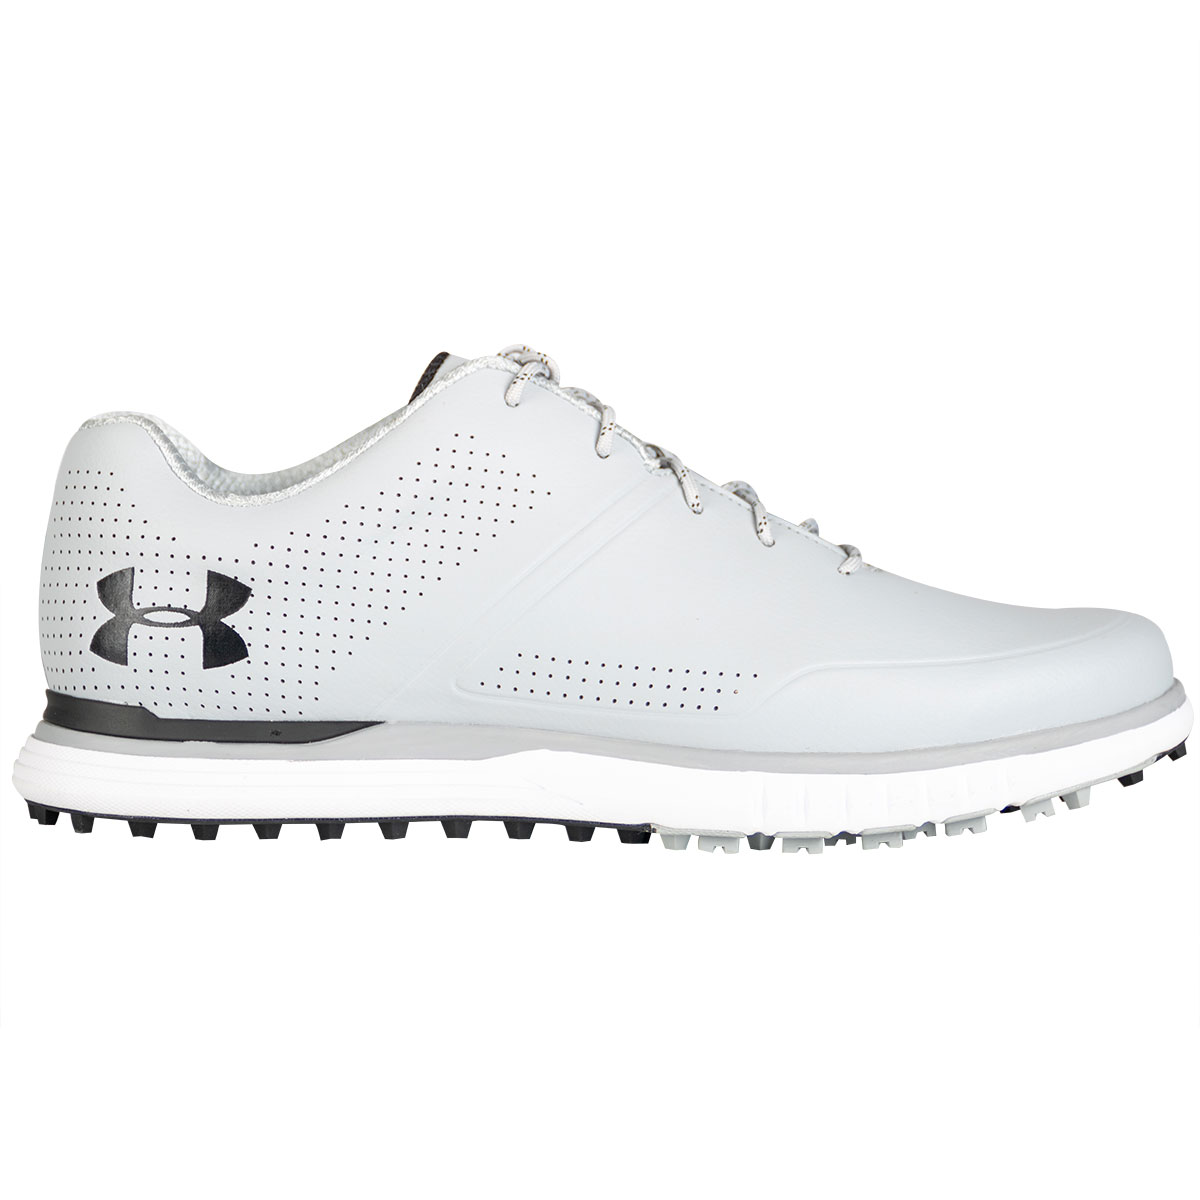 cheap under armour golf shoes